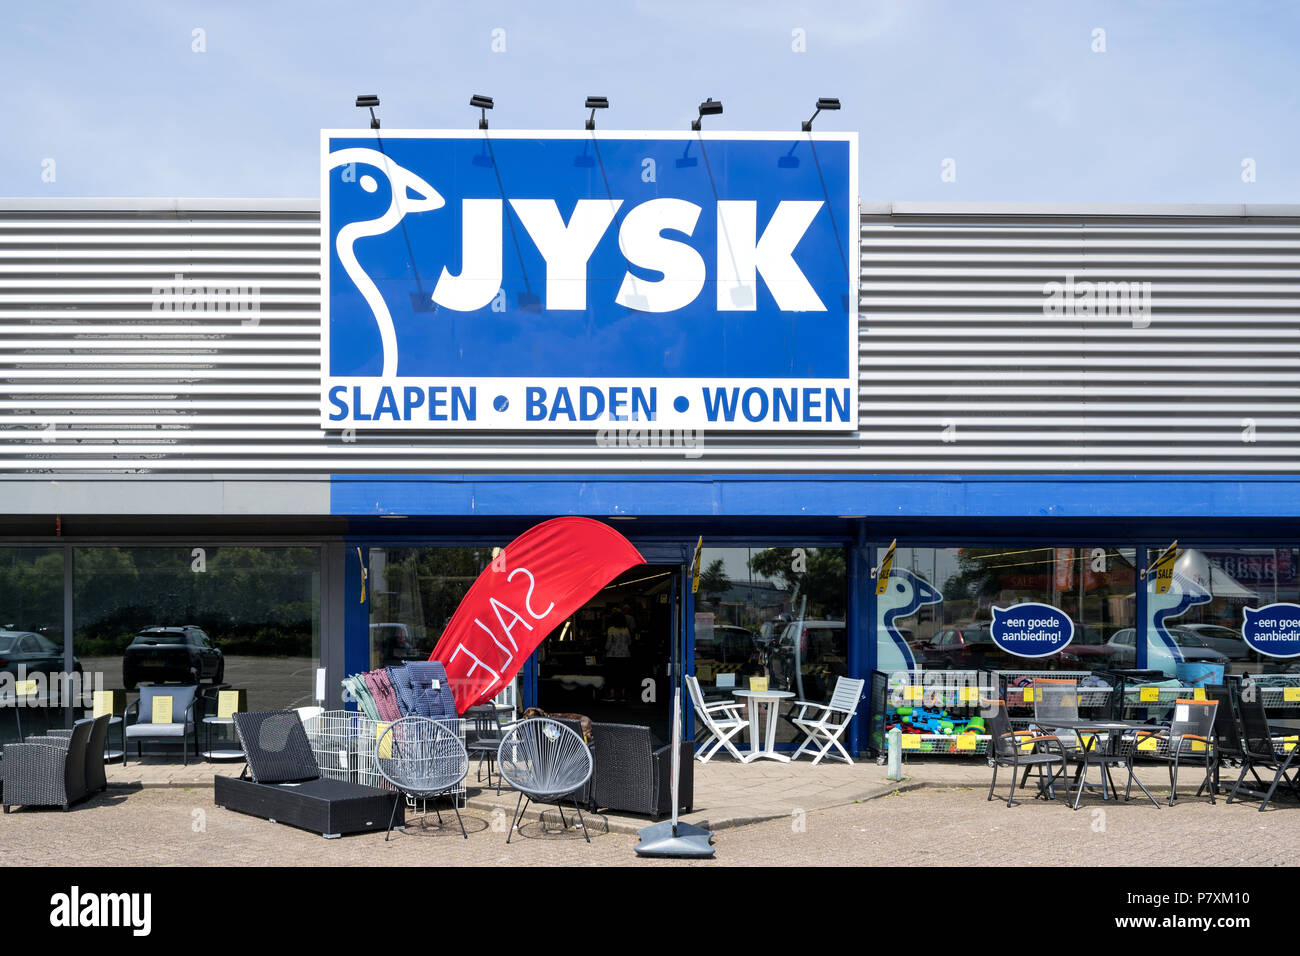 Jysk store in Beverwijk, the Netherlands. Jysk is a Danish retail chain,  selling household goods such as mattresses, furniture and interior decor  Stock Photo - Alamy